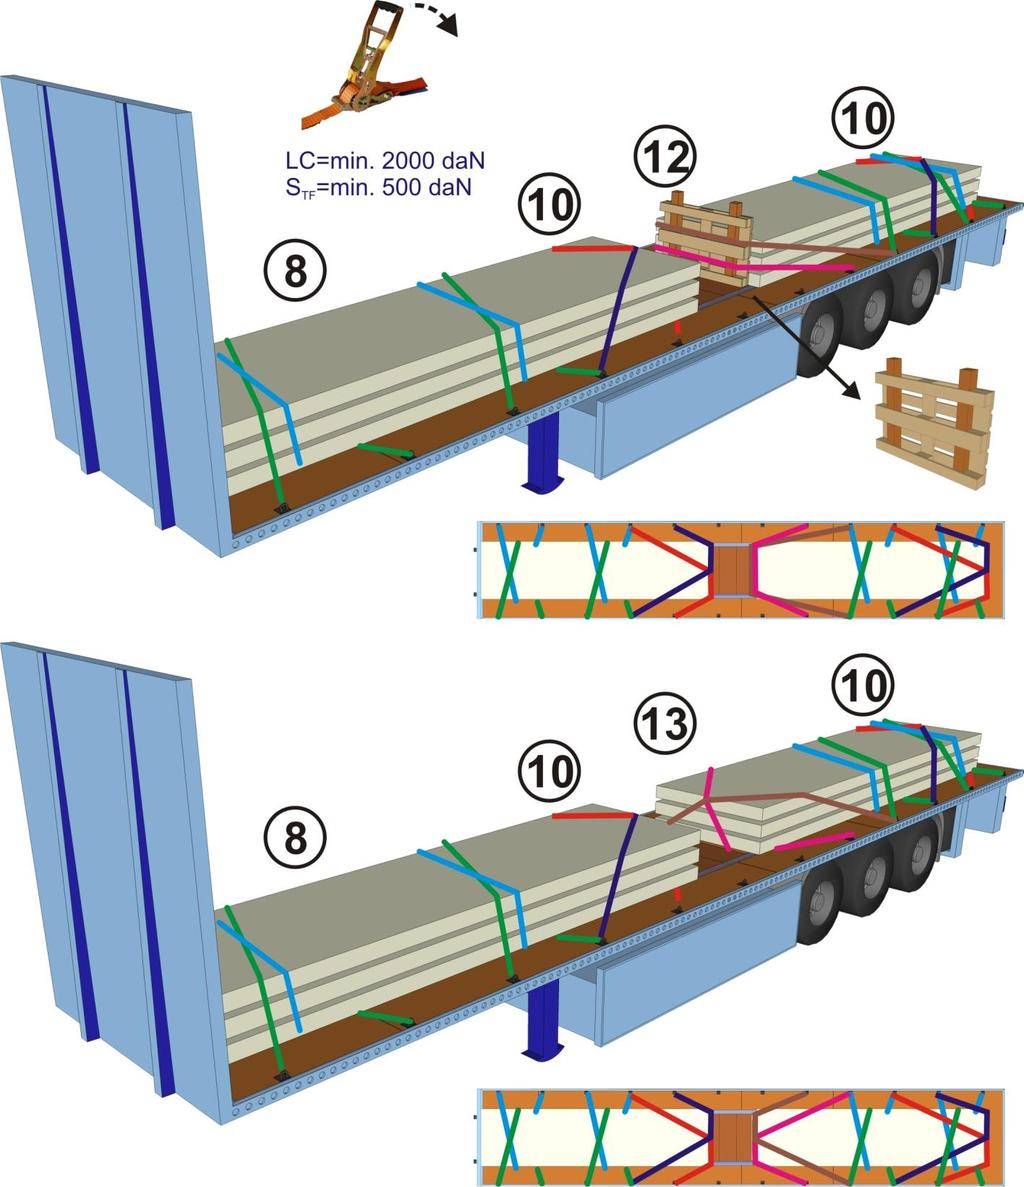 12. Cargo securing of unblocked cargo forwards by spring lashings in combination with a pallet and